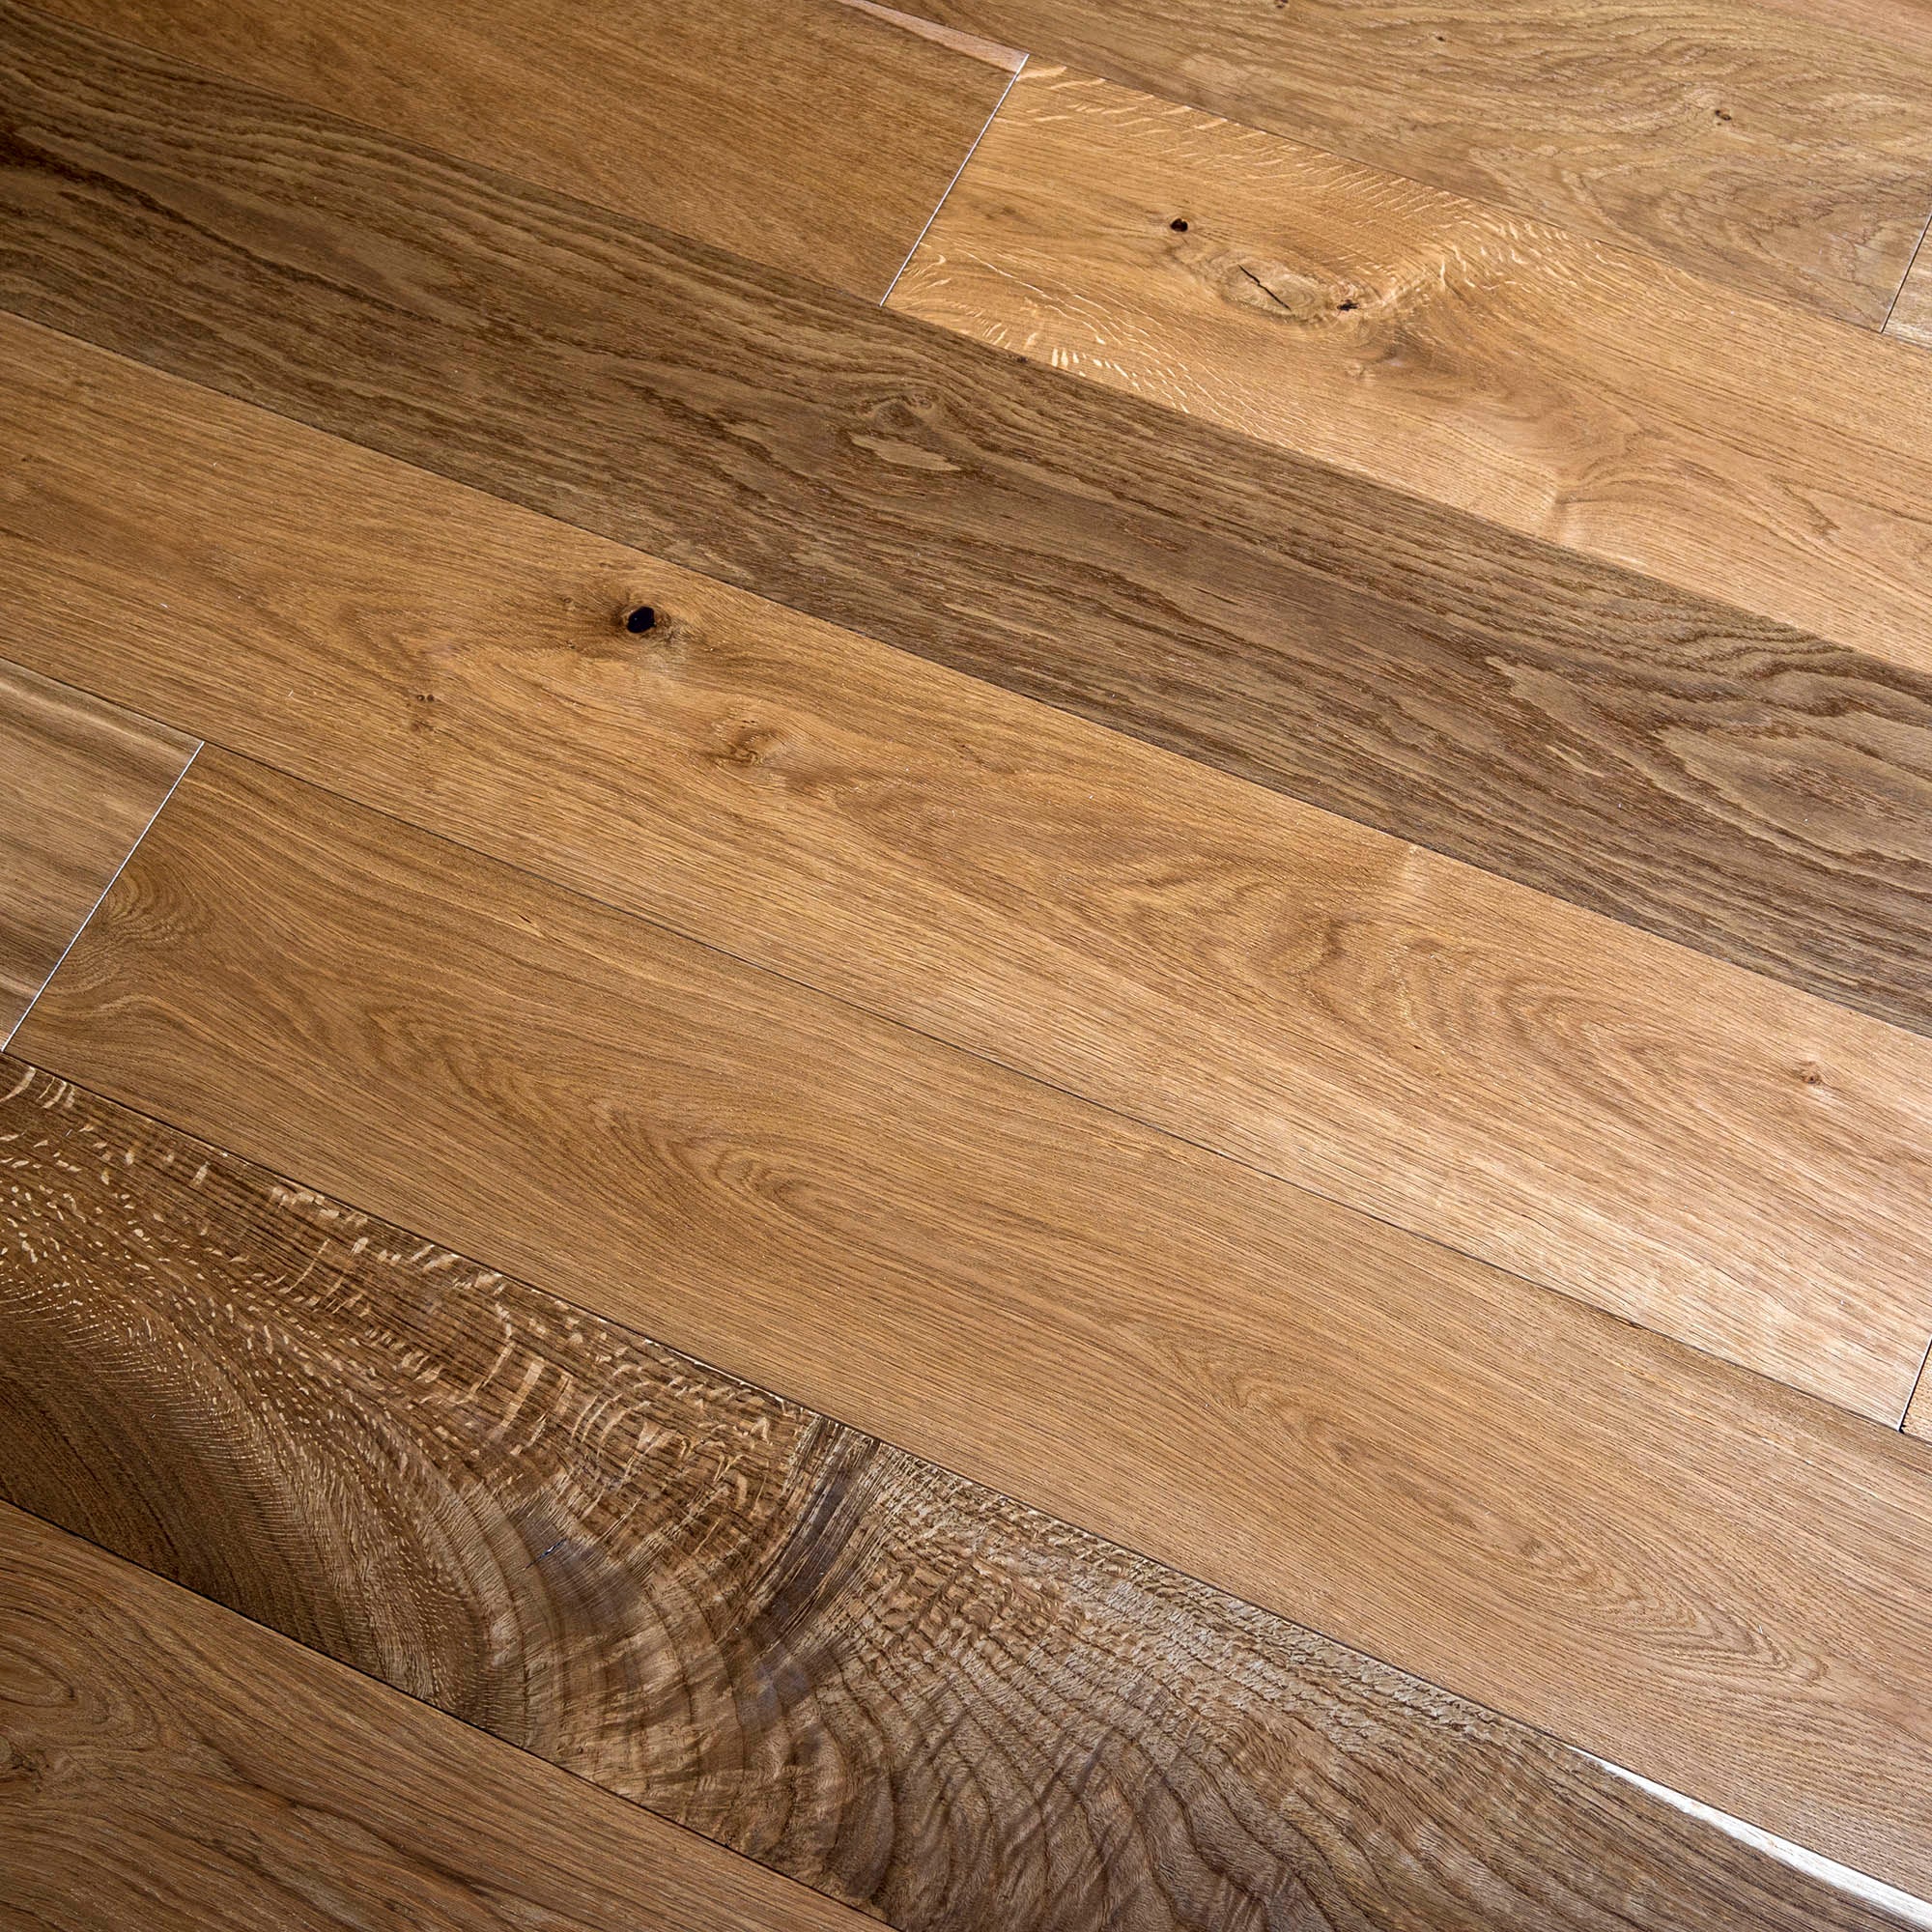 DC201 Smoked Oak - Engineered Wood Floor From V4